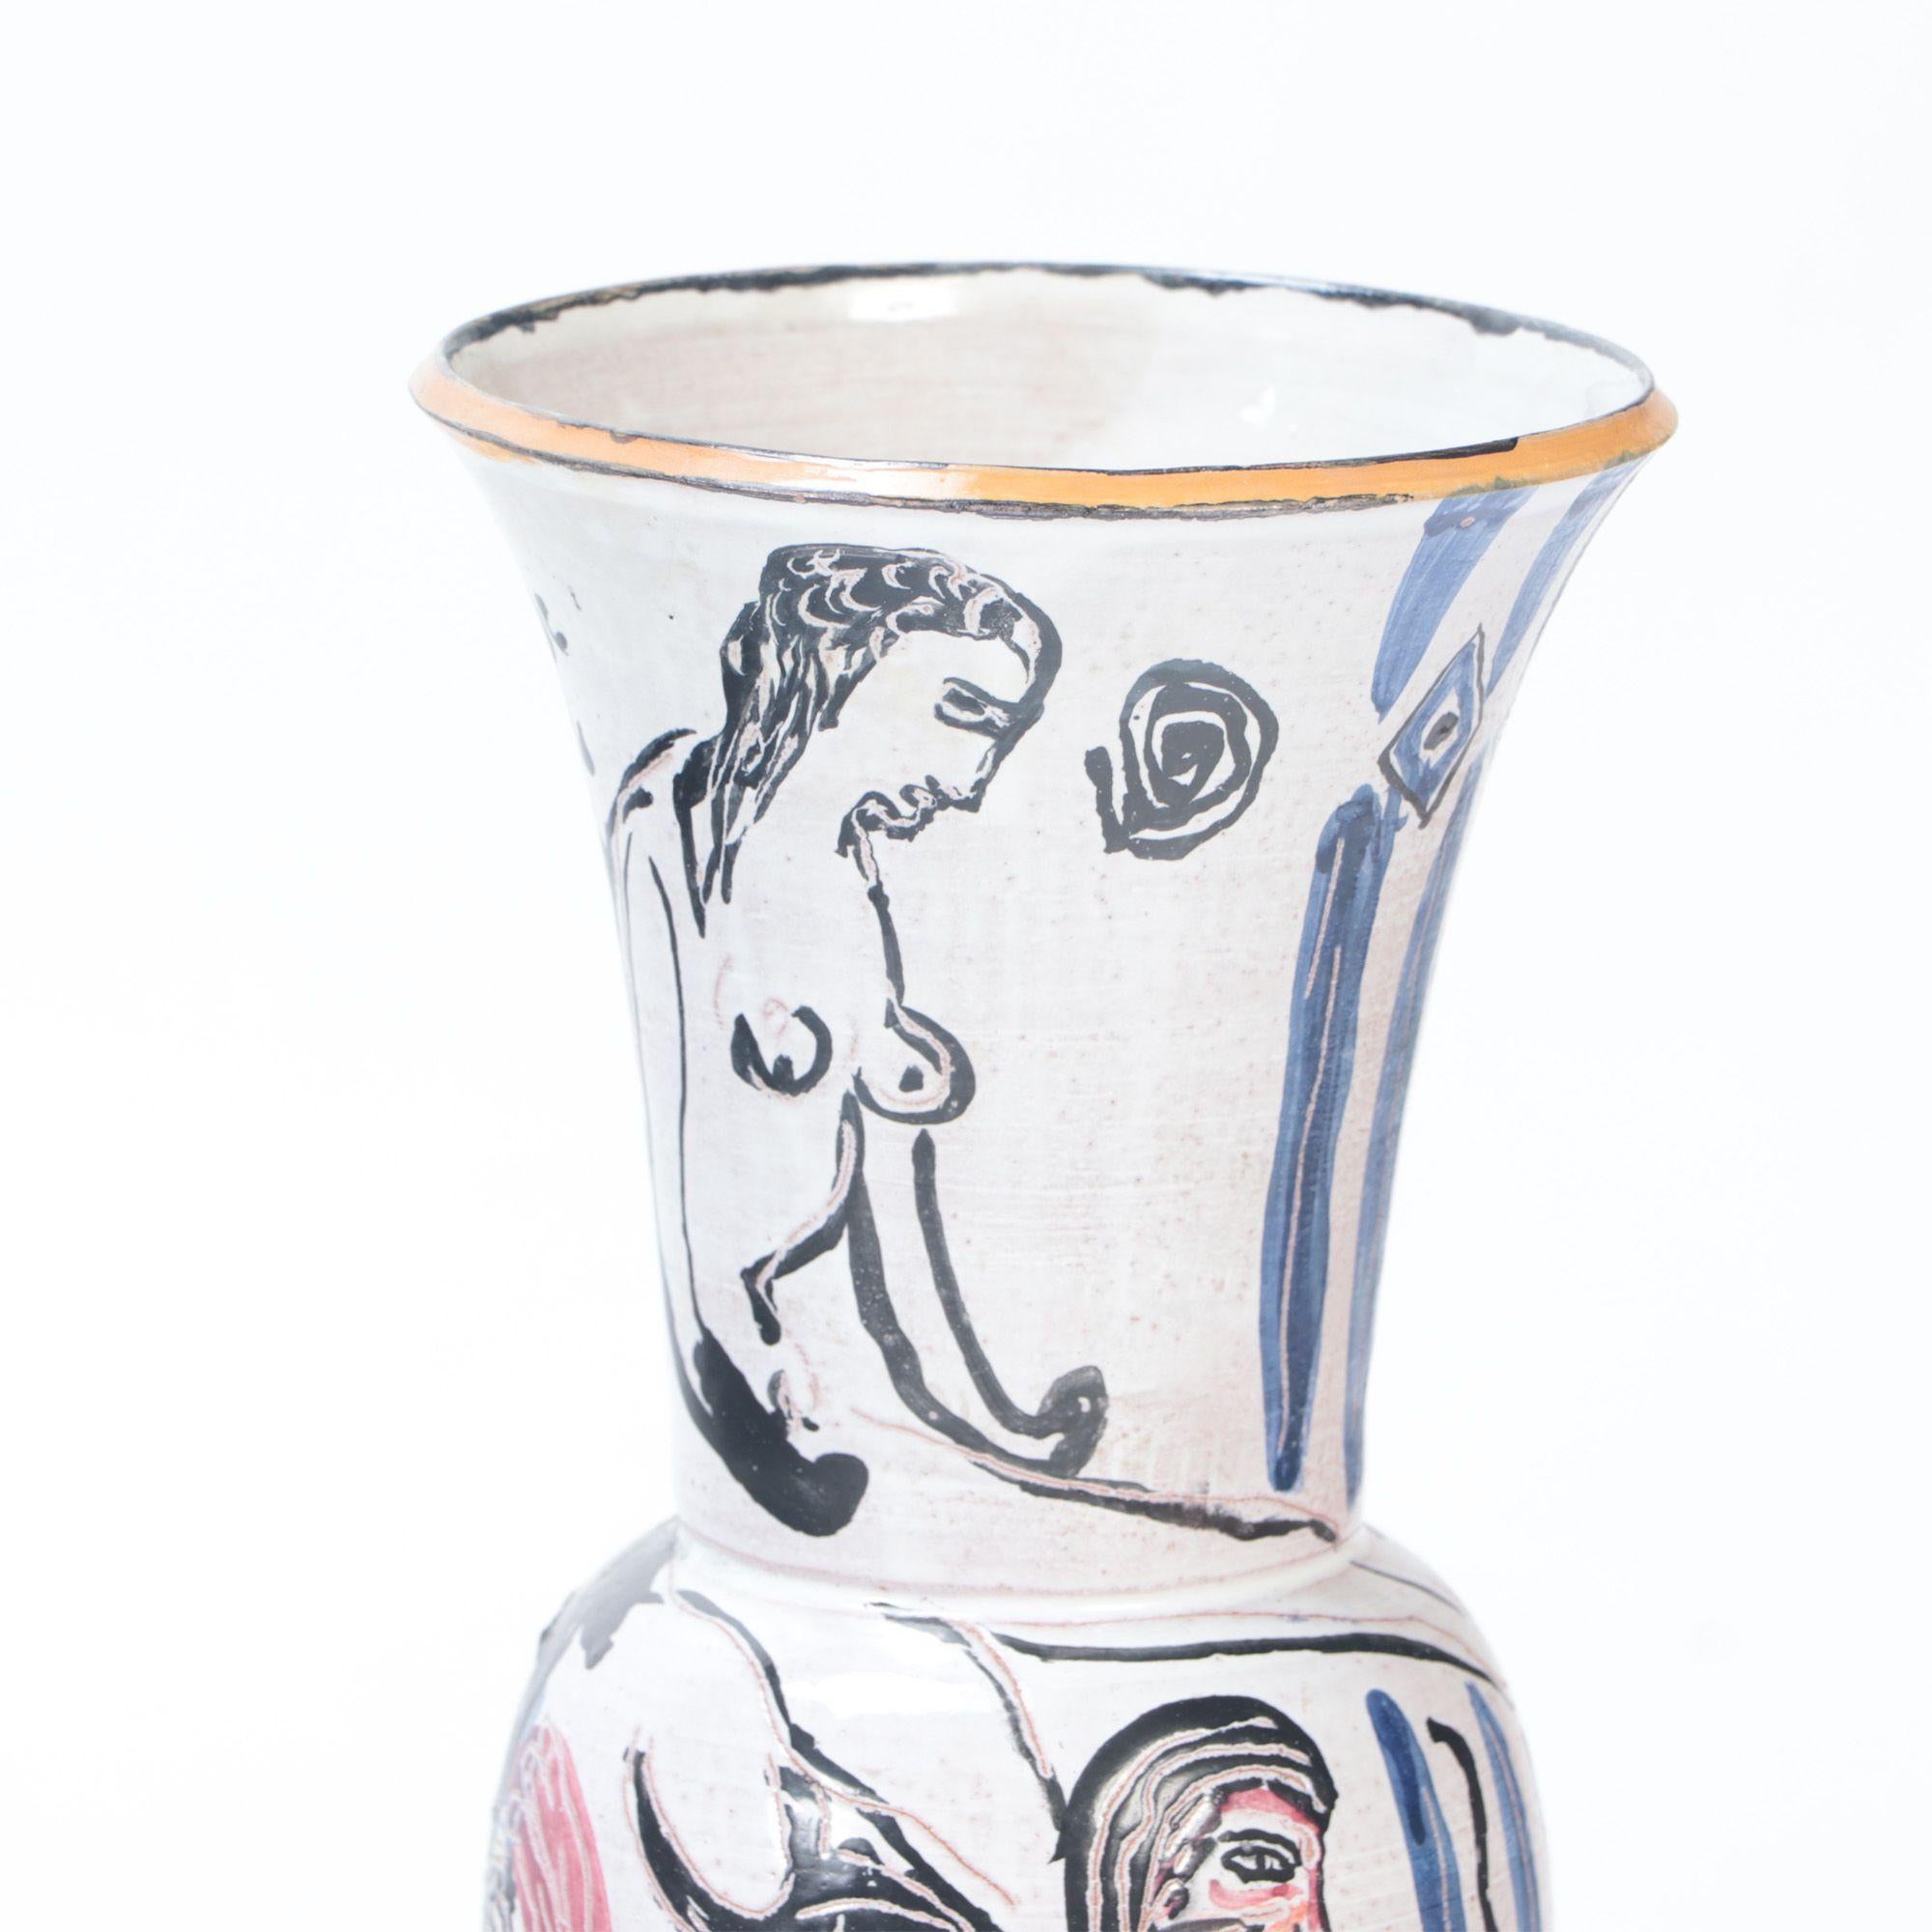 A tall ceramic vase by Anette Wandrer, Germany, c. 2000.
Annette Wandrer created a new technique which applies her art on her ceramic pieces.